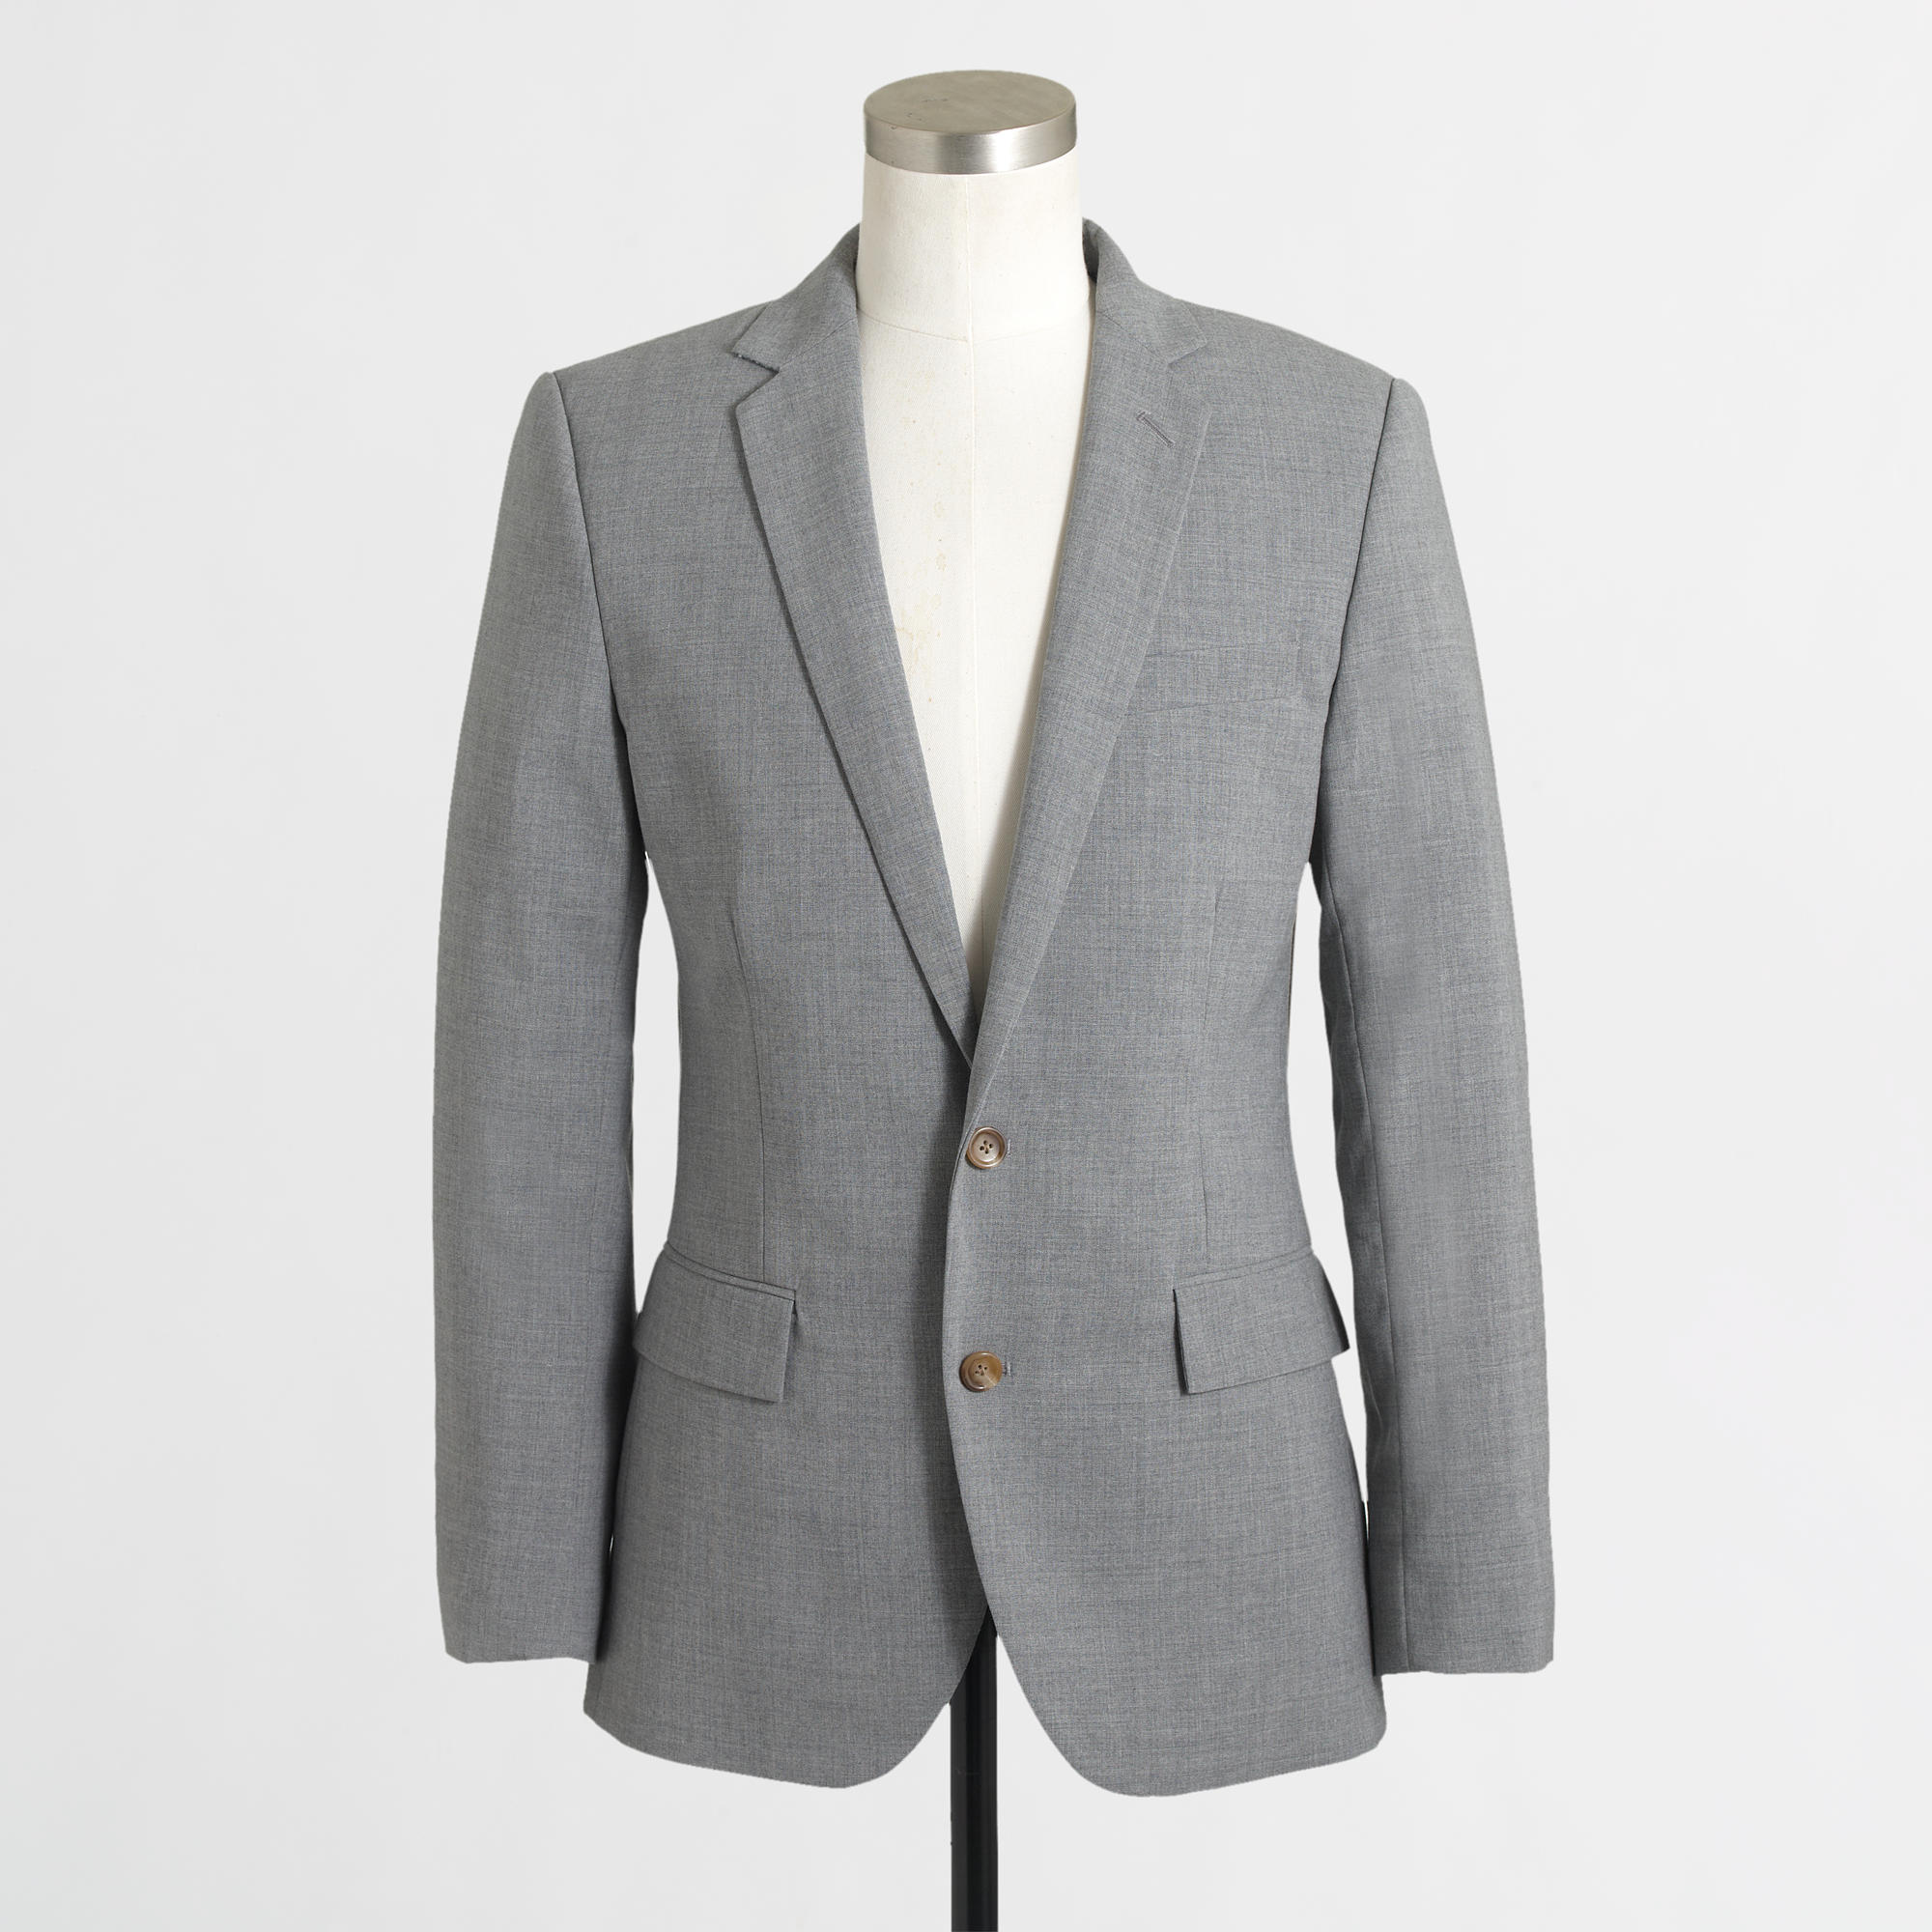 Factory Thompson suit jacket with double vent in ...